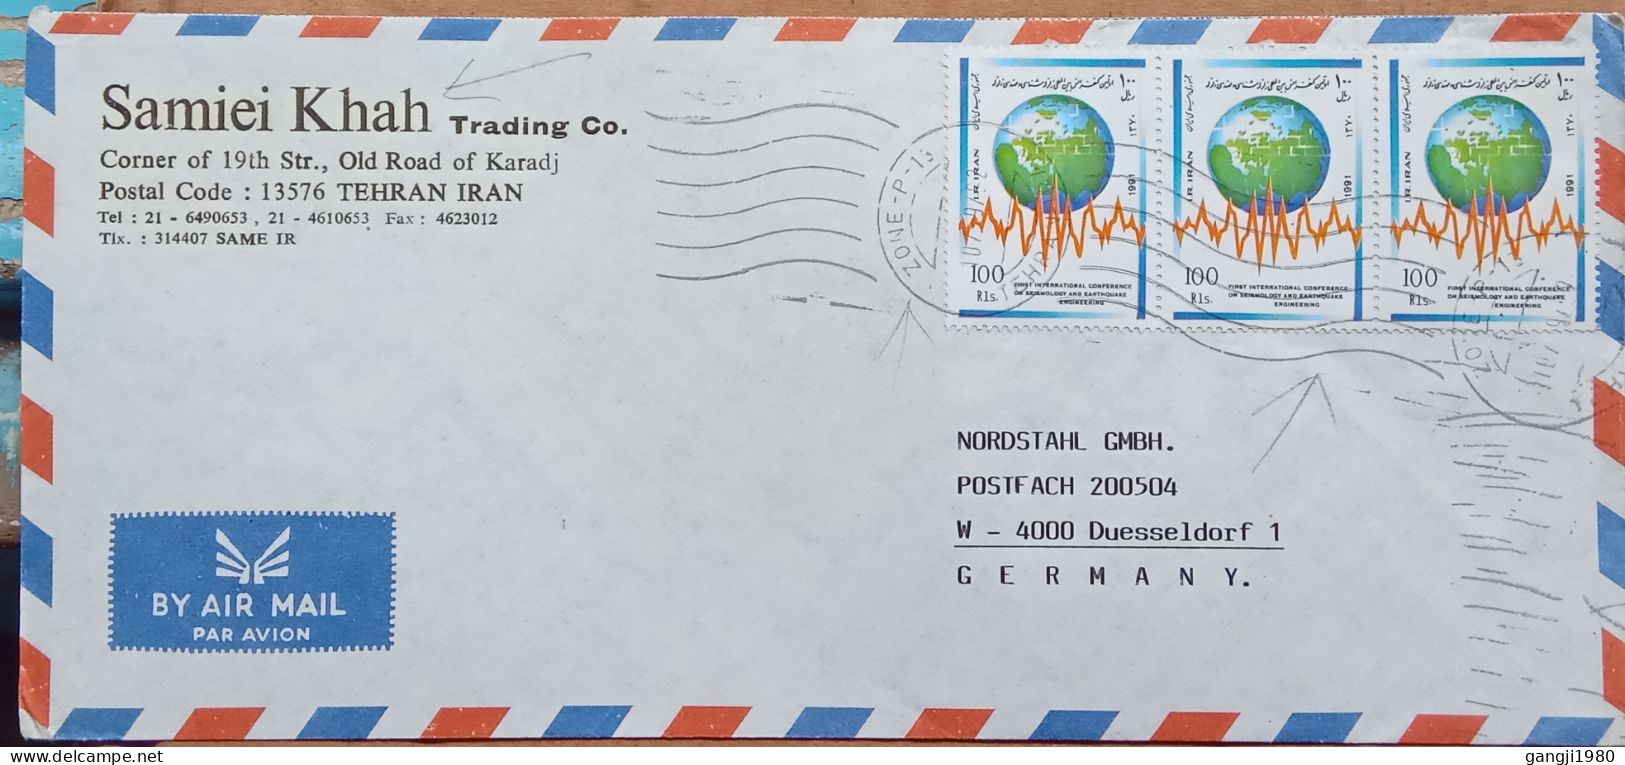 IRAN 1991, ADVERTISING COVER, SAMIEI KHAN, USED TO GERMANY, INT CONFERENCE ON EARTHQUAKE, 3 MULTI STAMP, ZONE-P-13 TEHRA - Irán